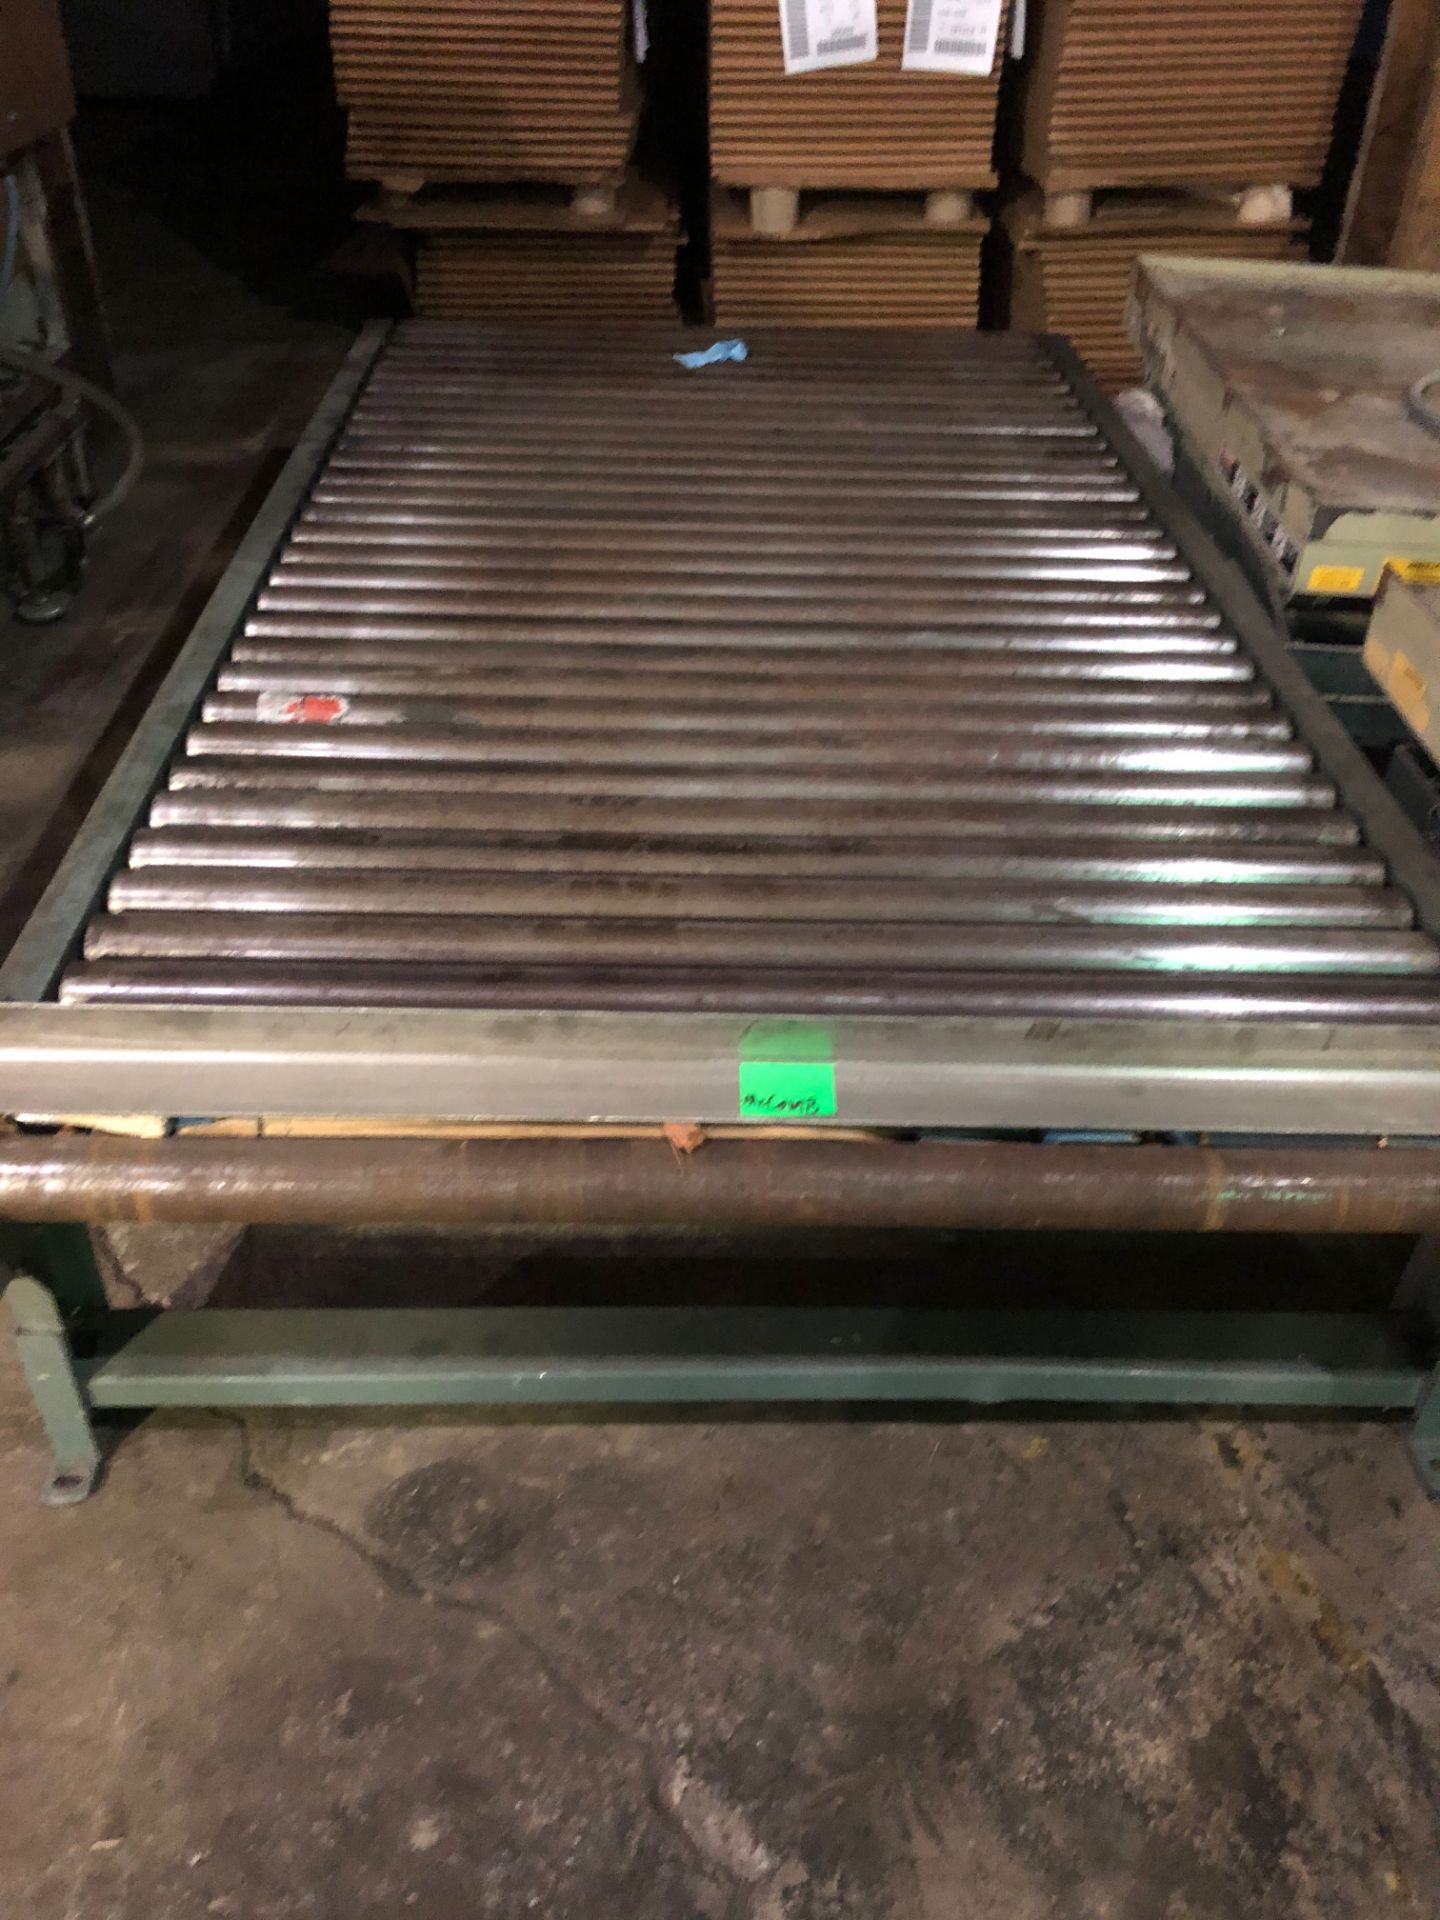 Pallet Conveyor Rigging Fee for the item: $30